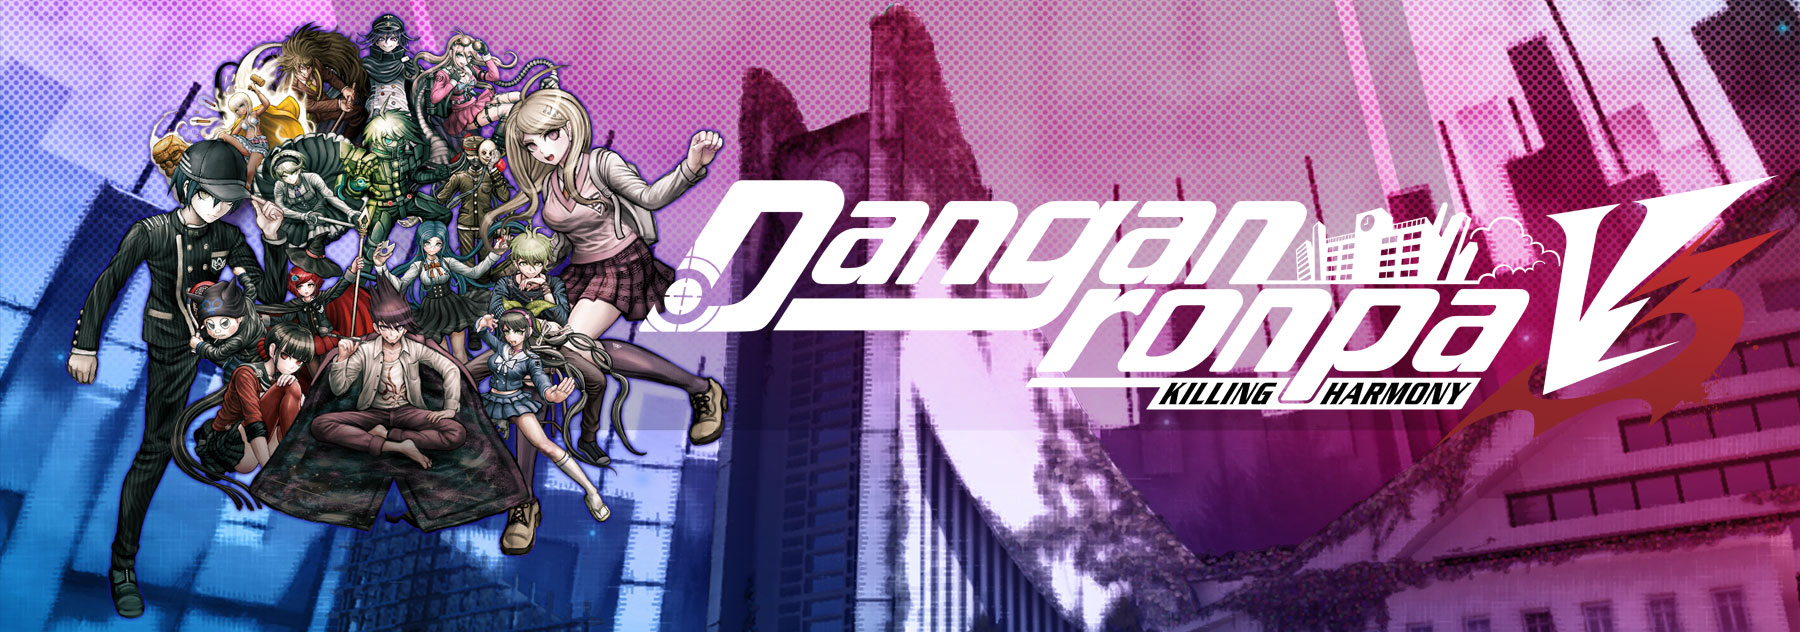 © Spike Chunsoft Co., Ltd. All Rights Reserved. Licensed to and published by NIS America, Inc. “DANGANRONPA” is a registered trademark of Spike Chunsoft Co., Ltd.